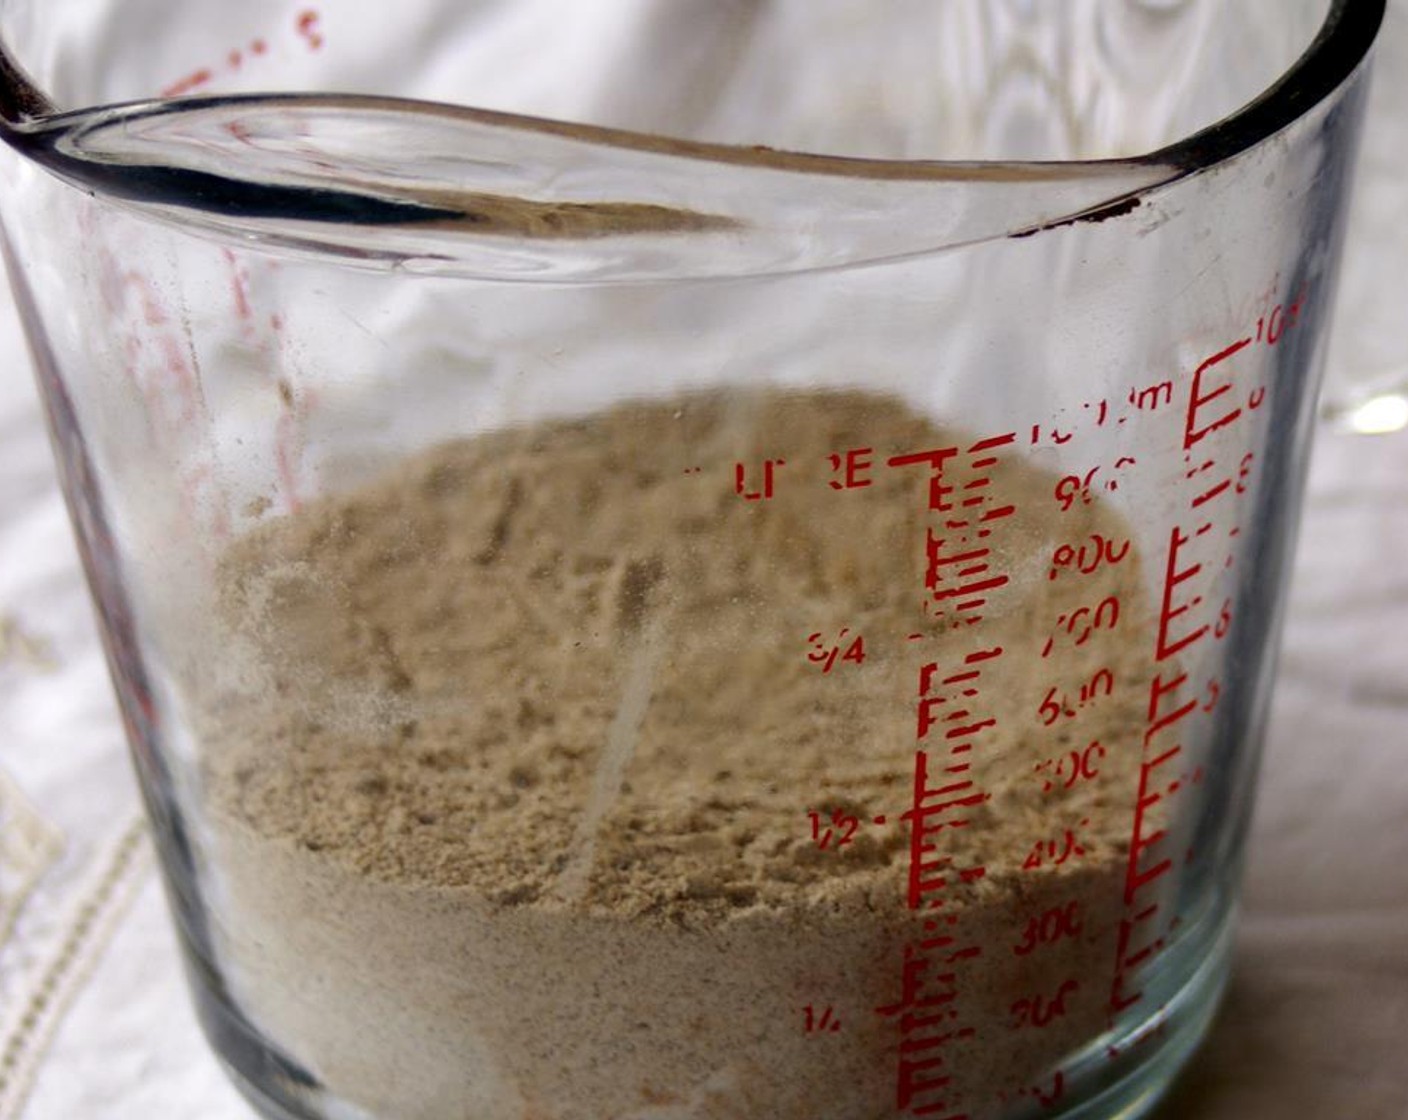 step 3 Add Buckwheat Flour (1 cup), Chia Seeds (1/4 cup), Baking Powder (1 Tbsp), Ground Cinnamon (1 Tbsp), Ground Nutmeg (1/2 tsp), and Salt (1/2 tsp) in a bowl and mix thoroughly.